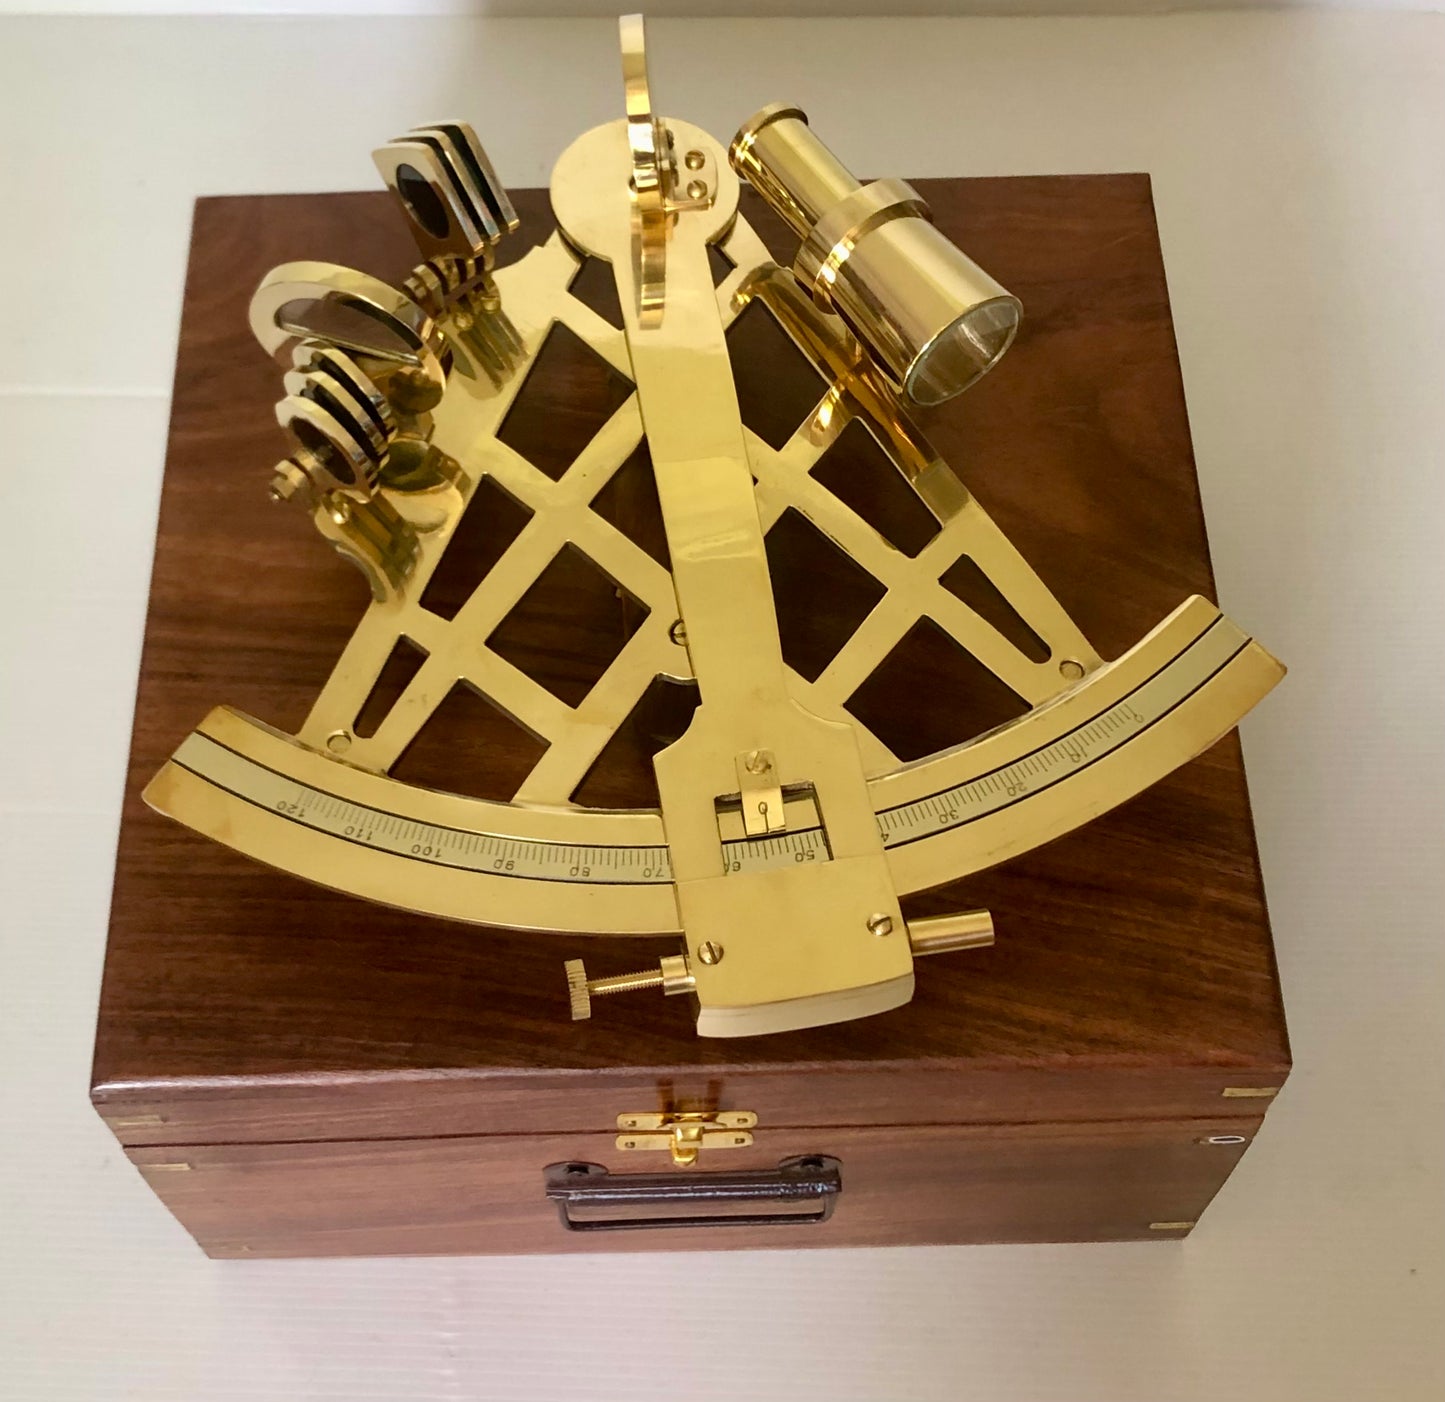 10” Sextant with Box (Shiny)